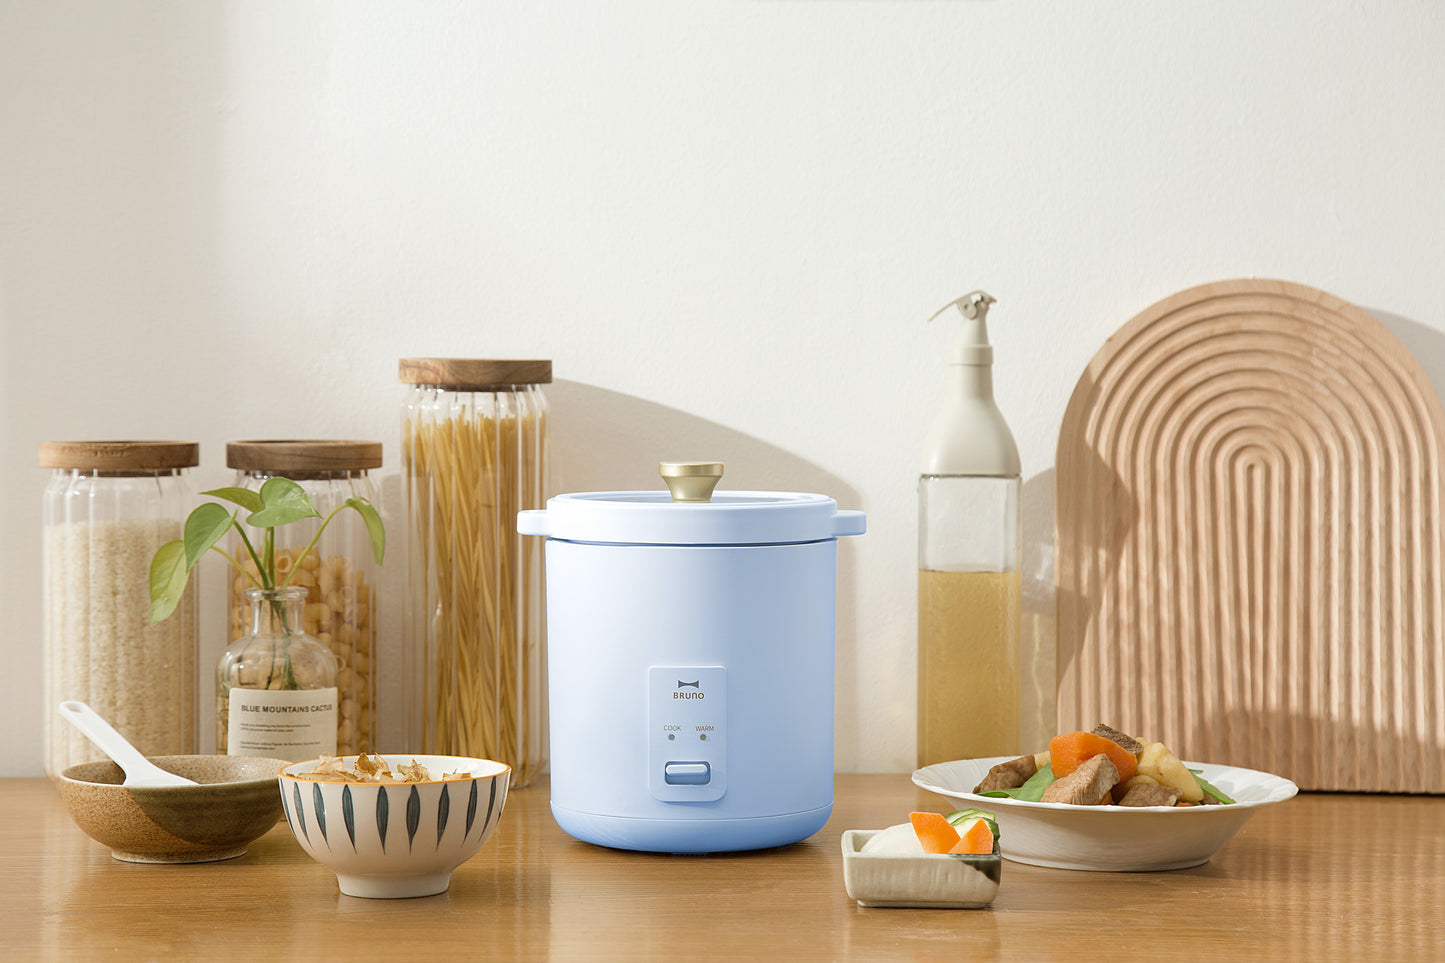 Compact Rice Cooker in Light Blue